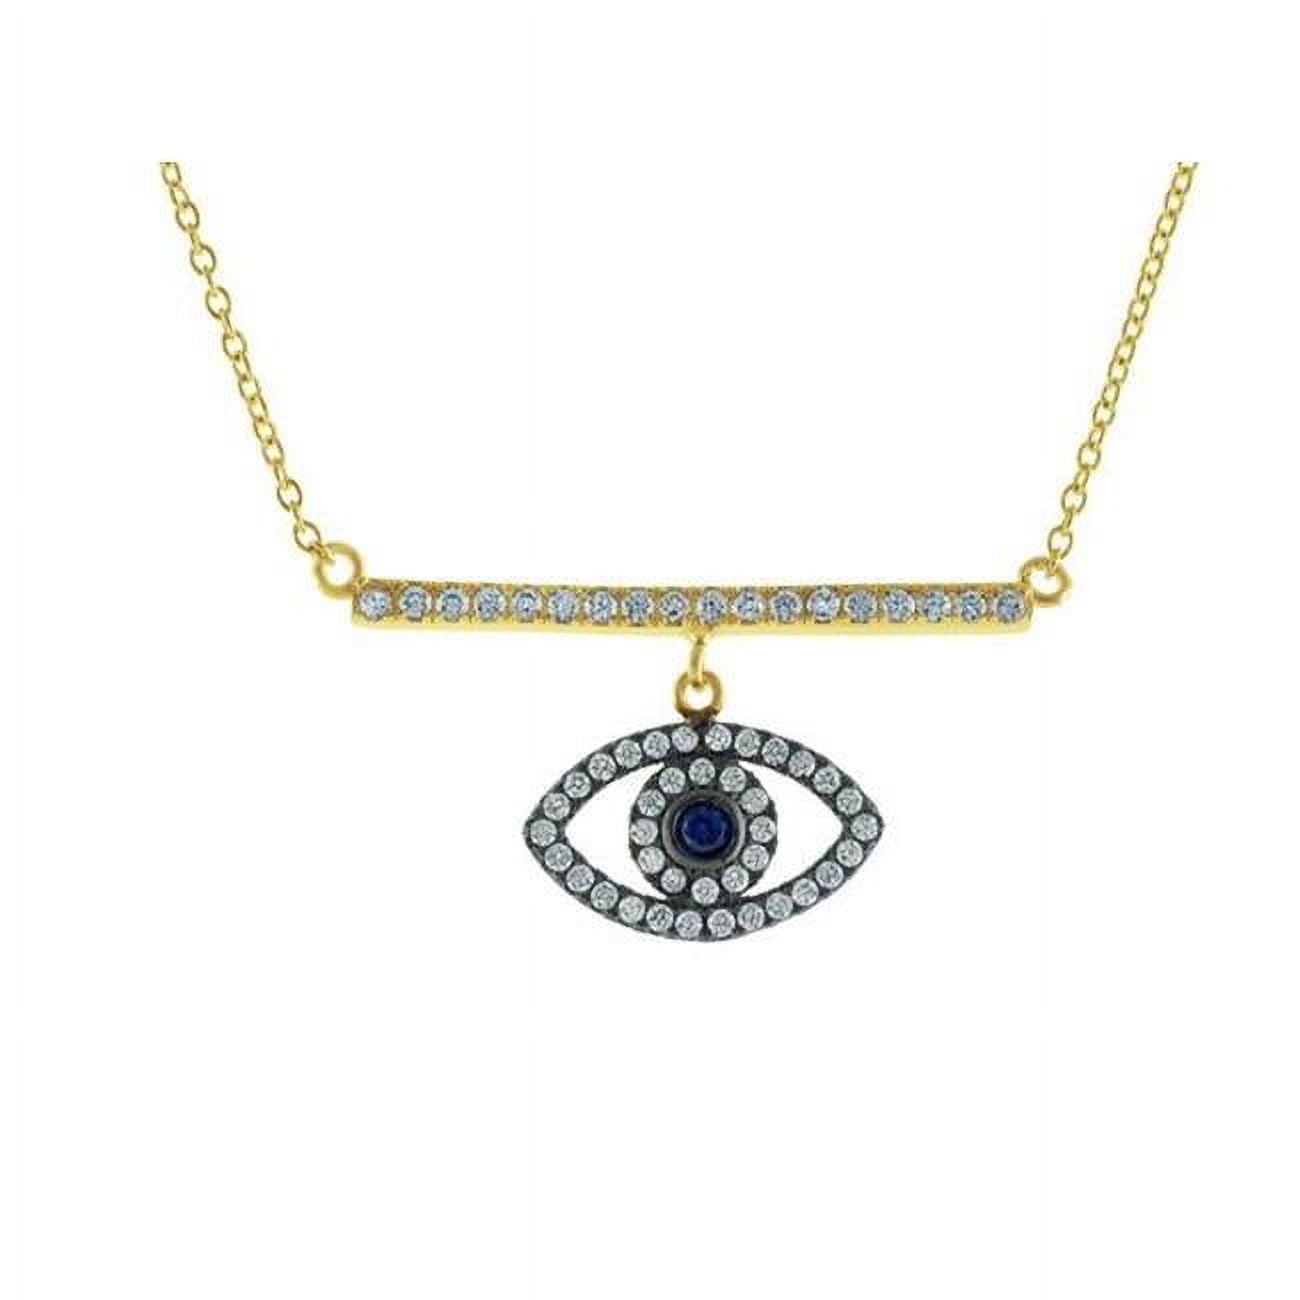 16 In. Plus 2 In. Extension Spiritual Cubic Zirconia Bar & Eye Gold Plated Sterling Silver Necklace